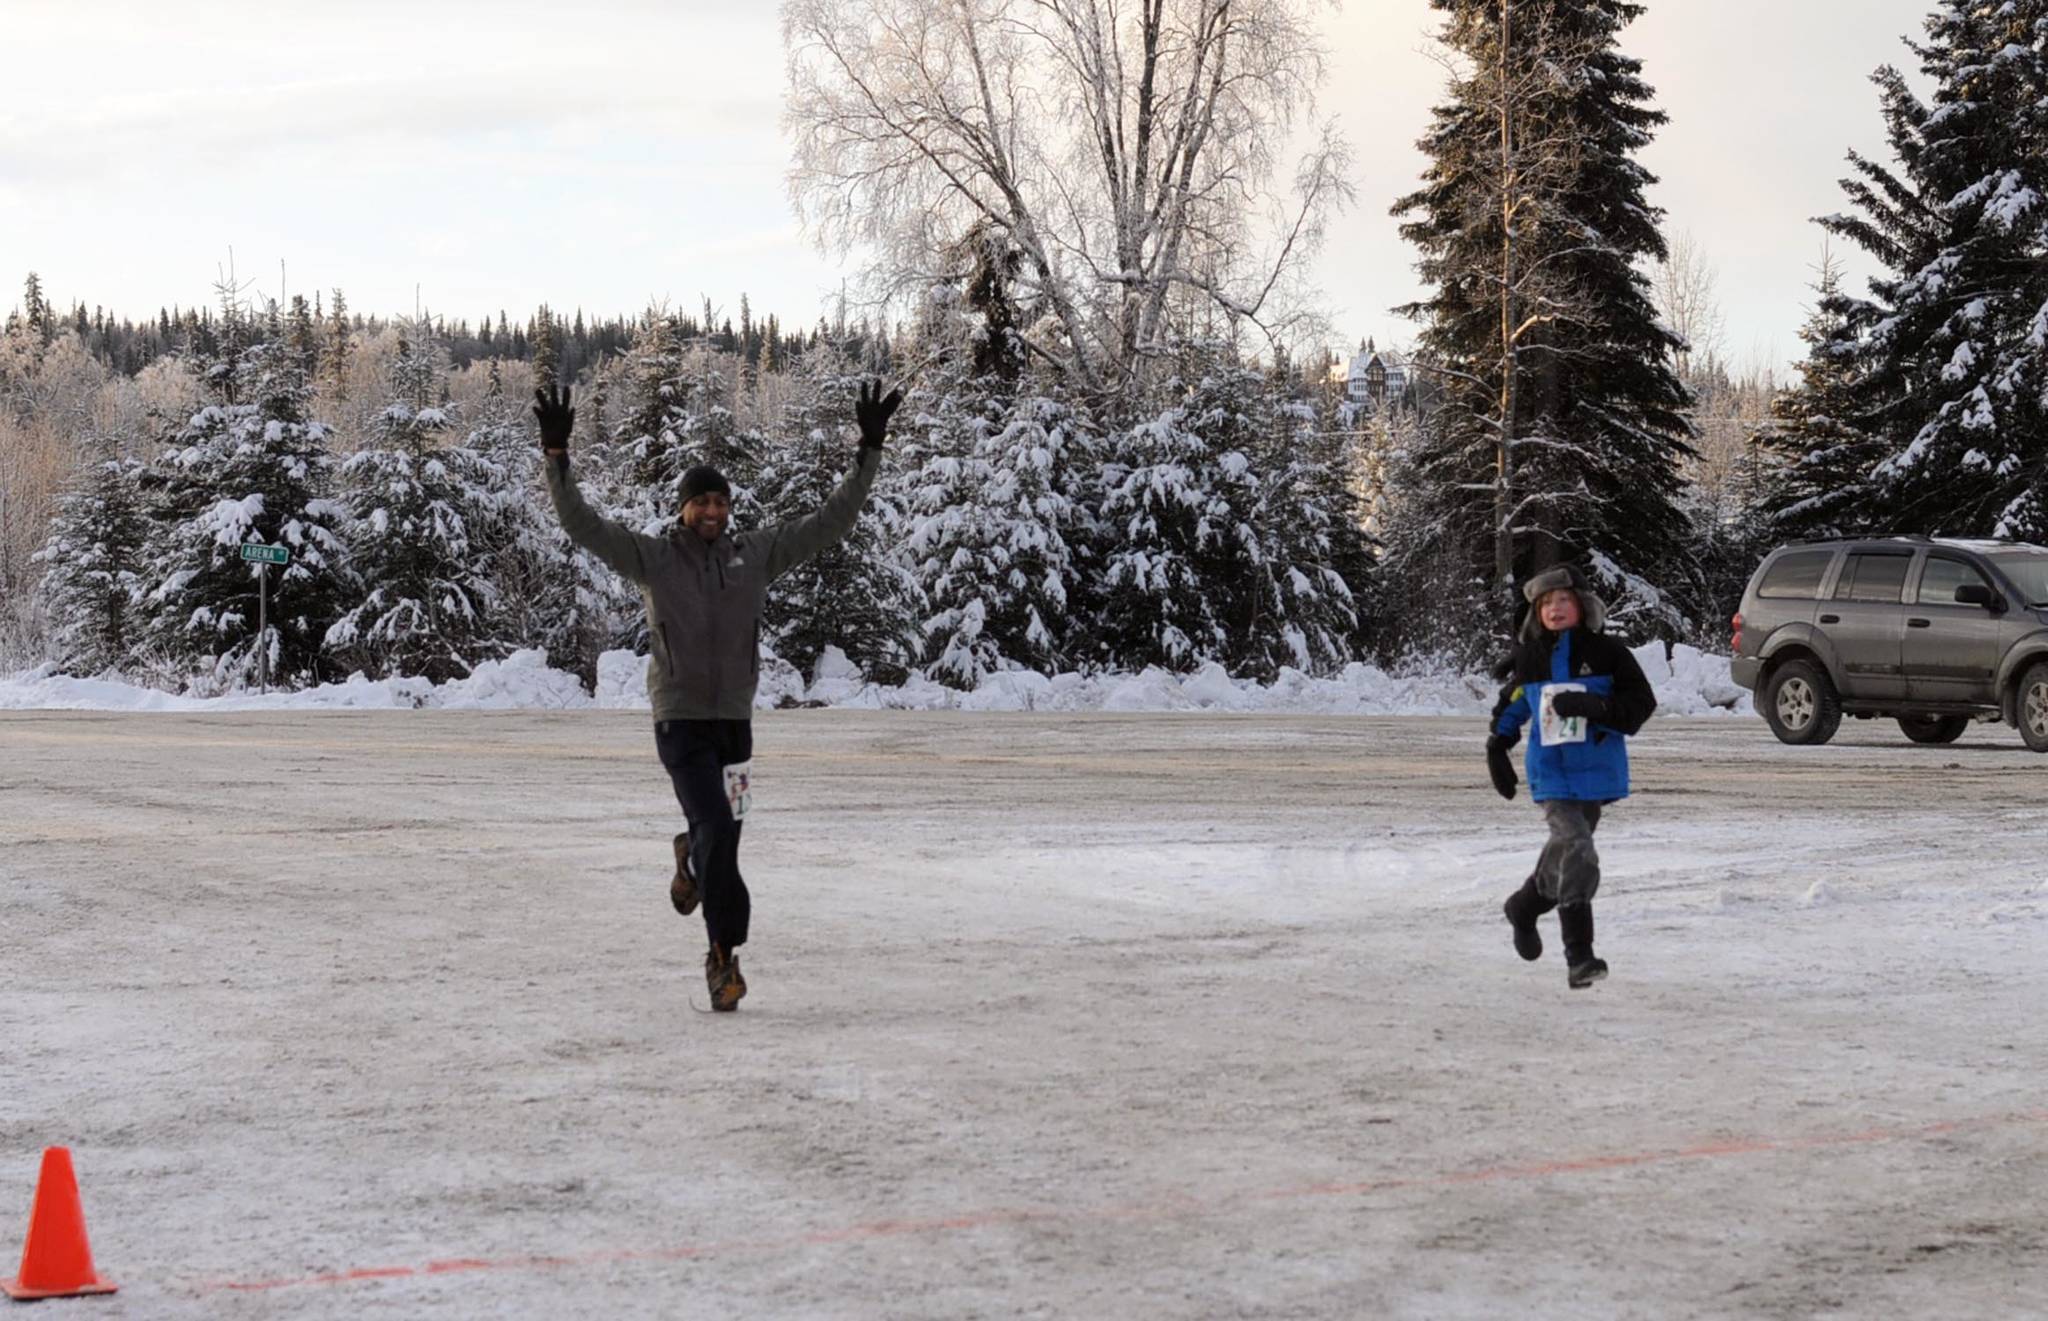 Ernest Umarwadia (left), of Houston, Texas, crosses the finish line to win the 5K Turkey Trot race at the Soldotna Regional Sports Complex on Thursday, Nov. 23, 2017 in Soldotna, Alaska. The organizers of the event, which also included a 1-mile race, donated all the proceeds to Freedom House, a Soldotna-based nonprofit sober living home for women recovering from addiction. (Photo by Elizabeth Earl/Peninsula Clarion)